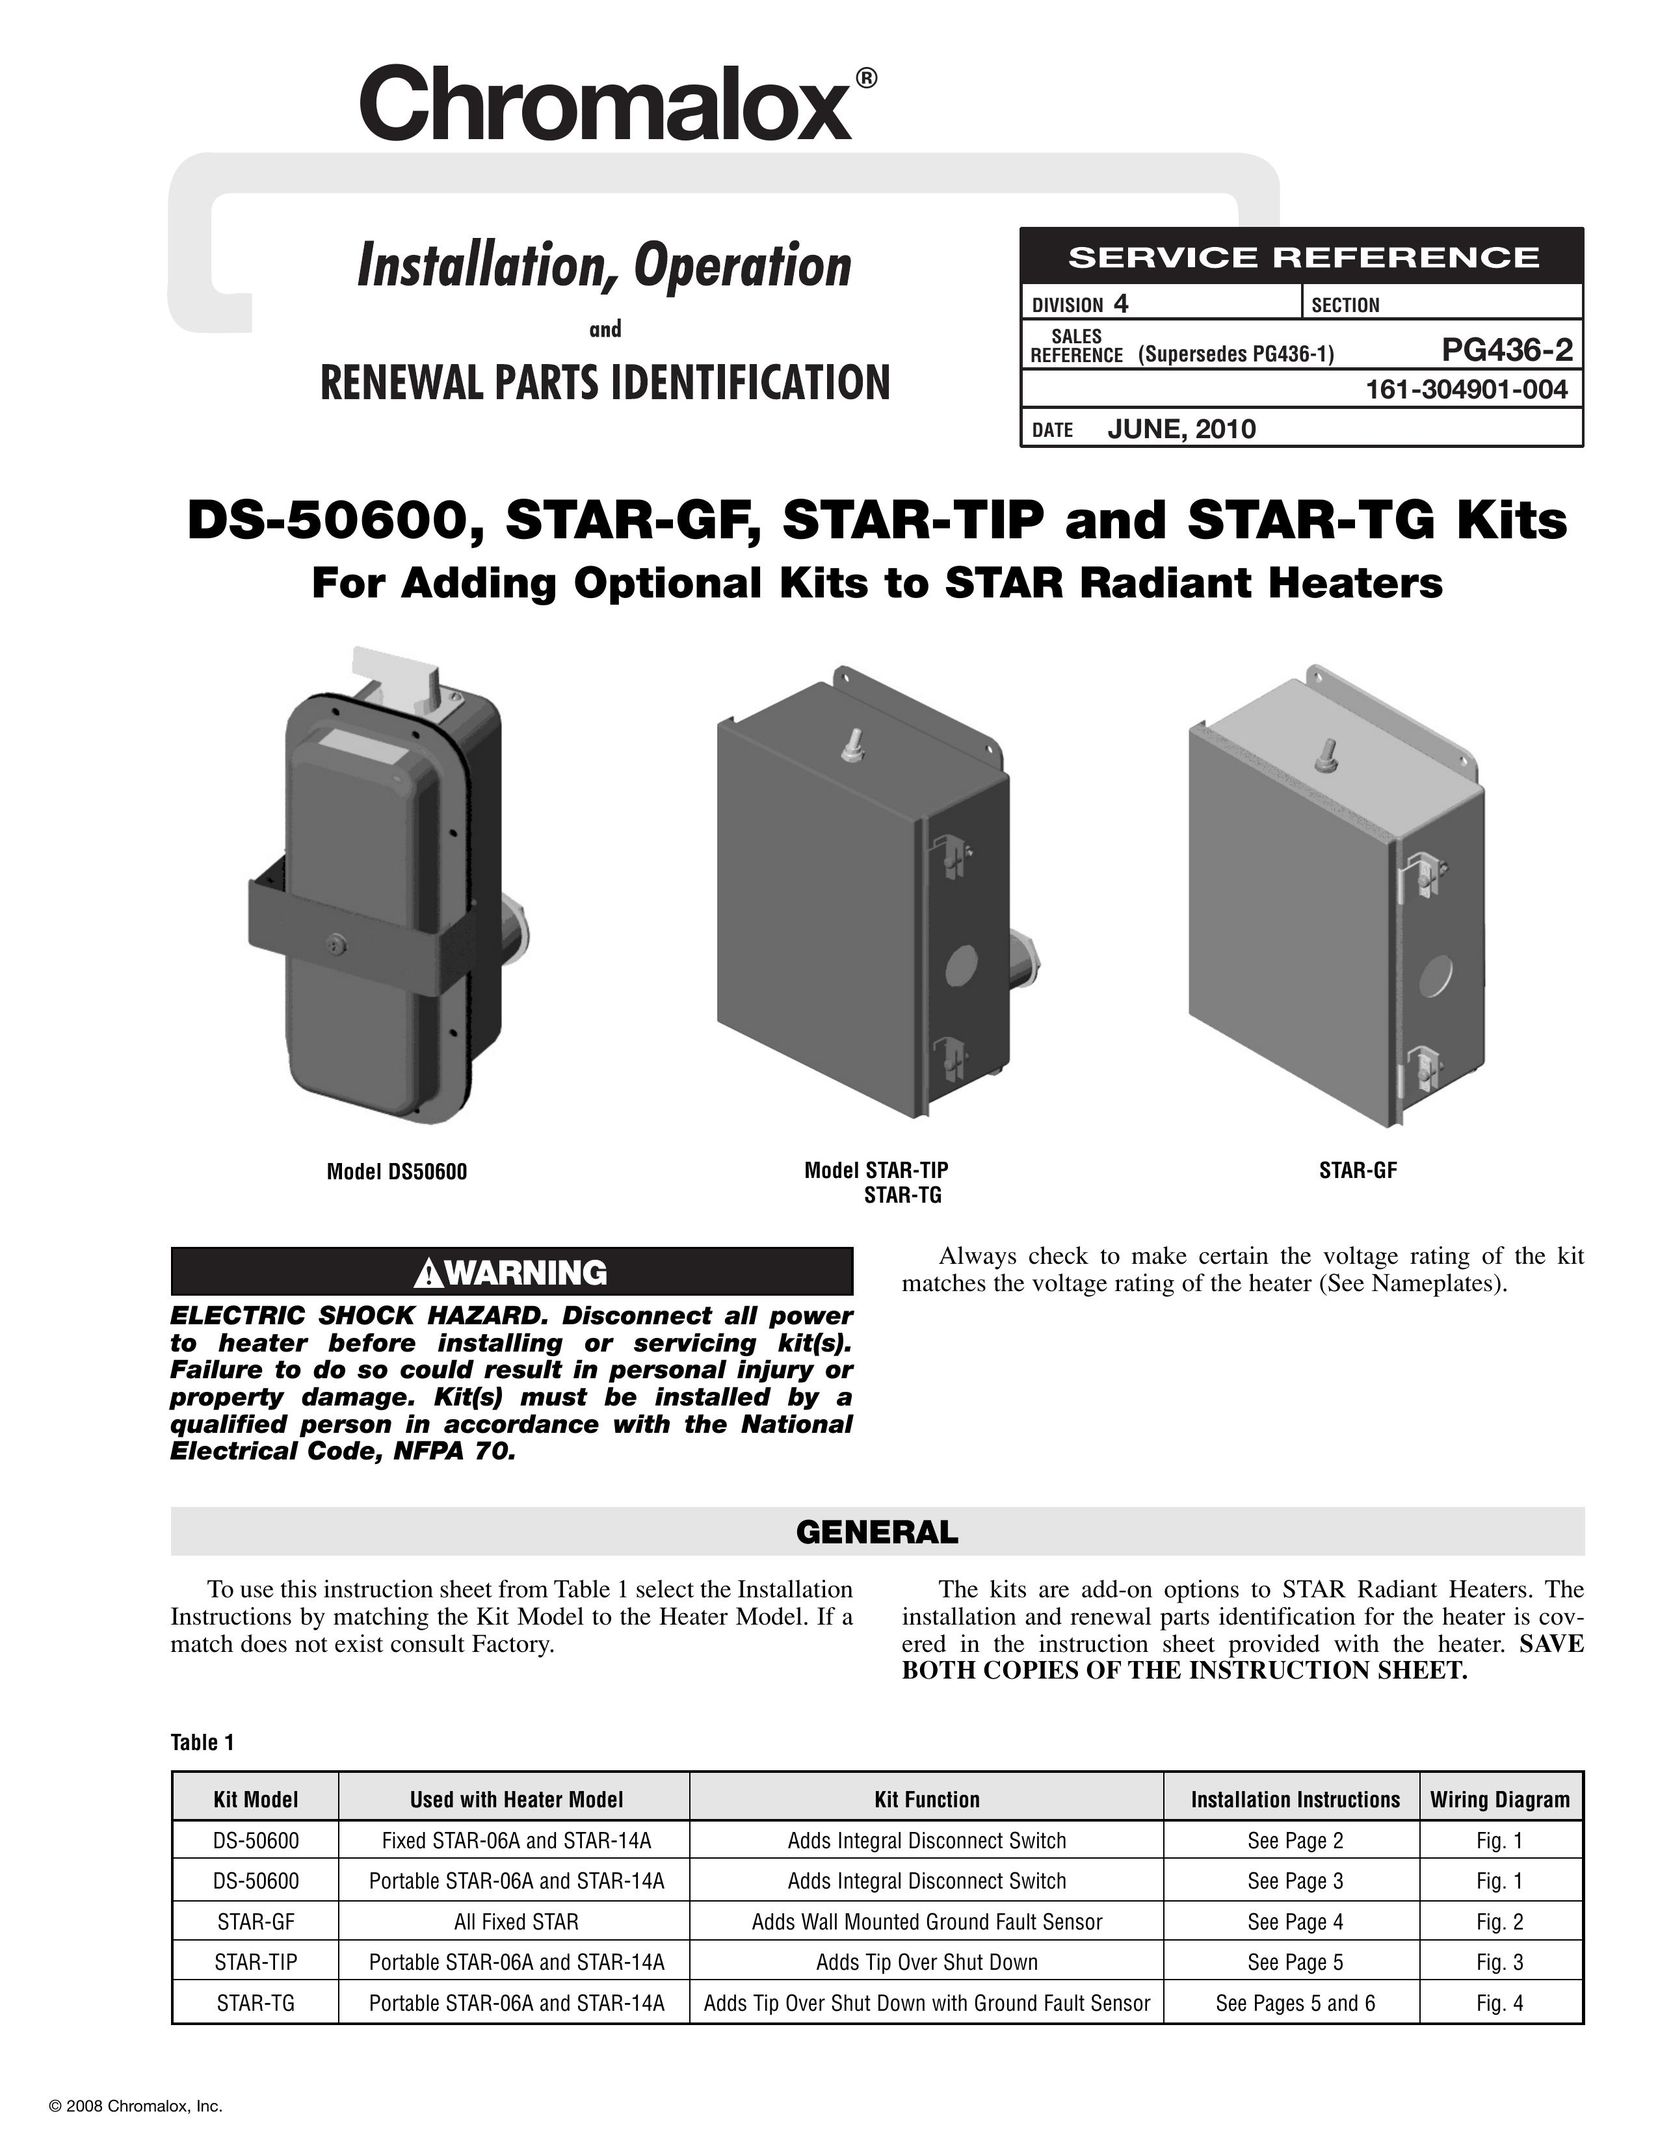 Chromalox DS-50600 Electric Heater User Manual